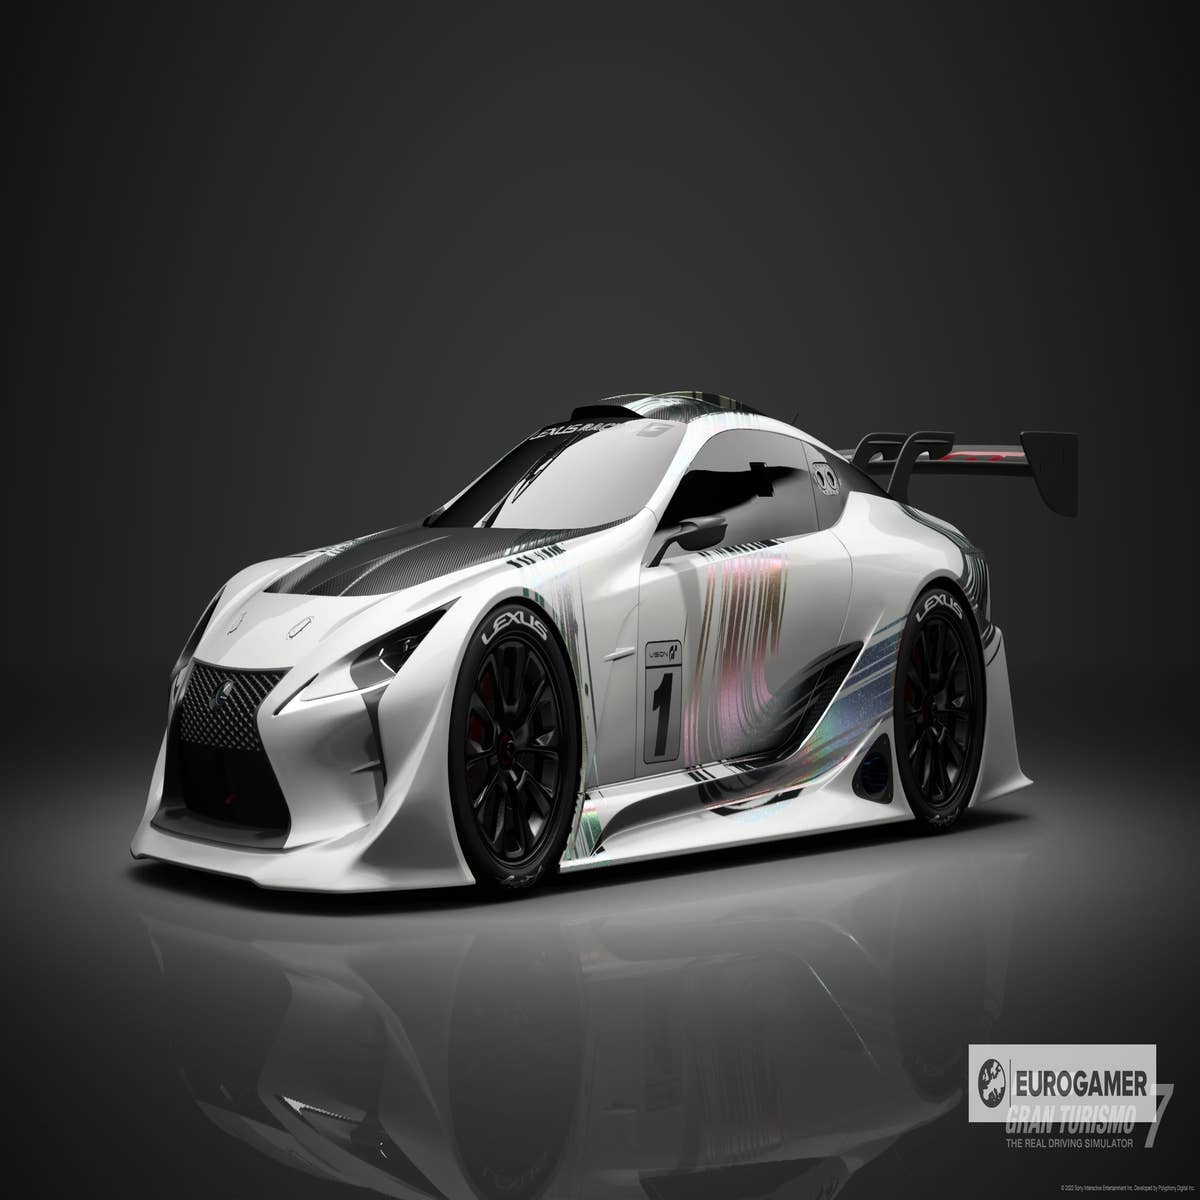 Gran Turismo 7 Legend Cars: These are the most expensive cars in GT7